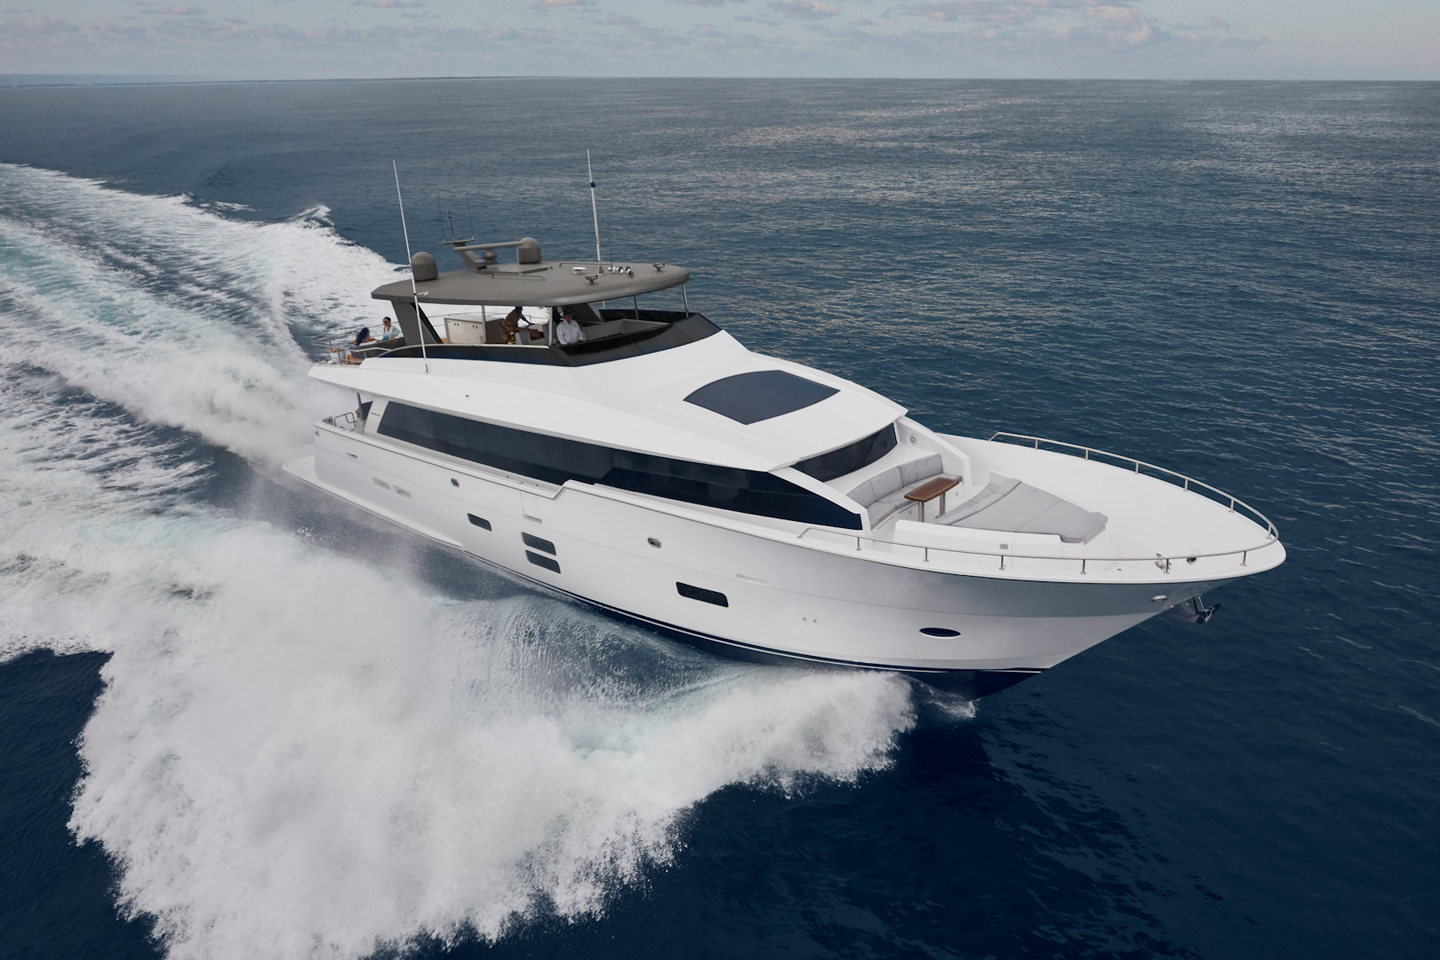 360 VR Virtual Tours of the Hatteras 90 Motor Yacht